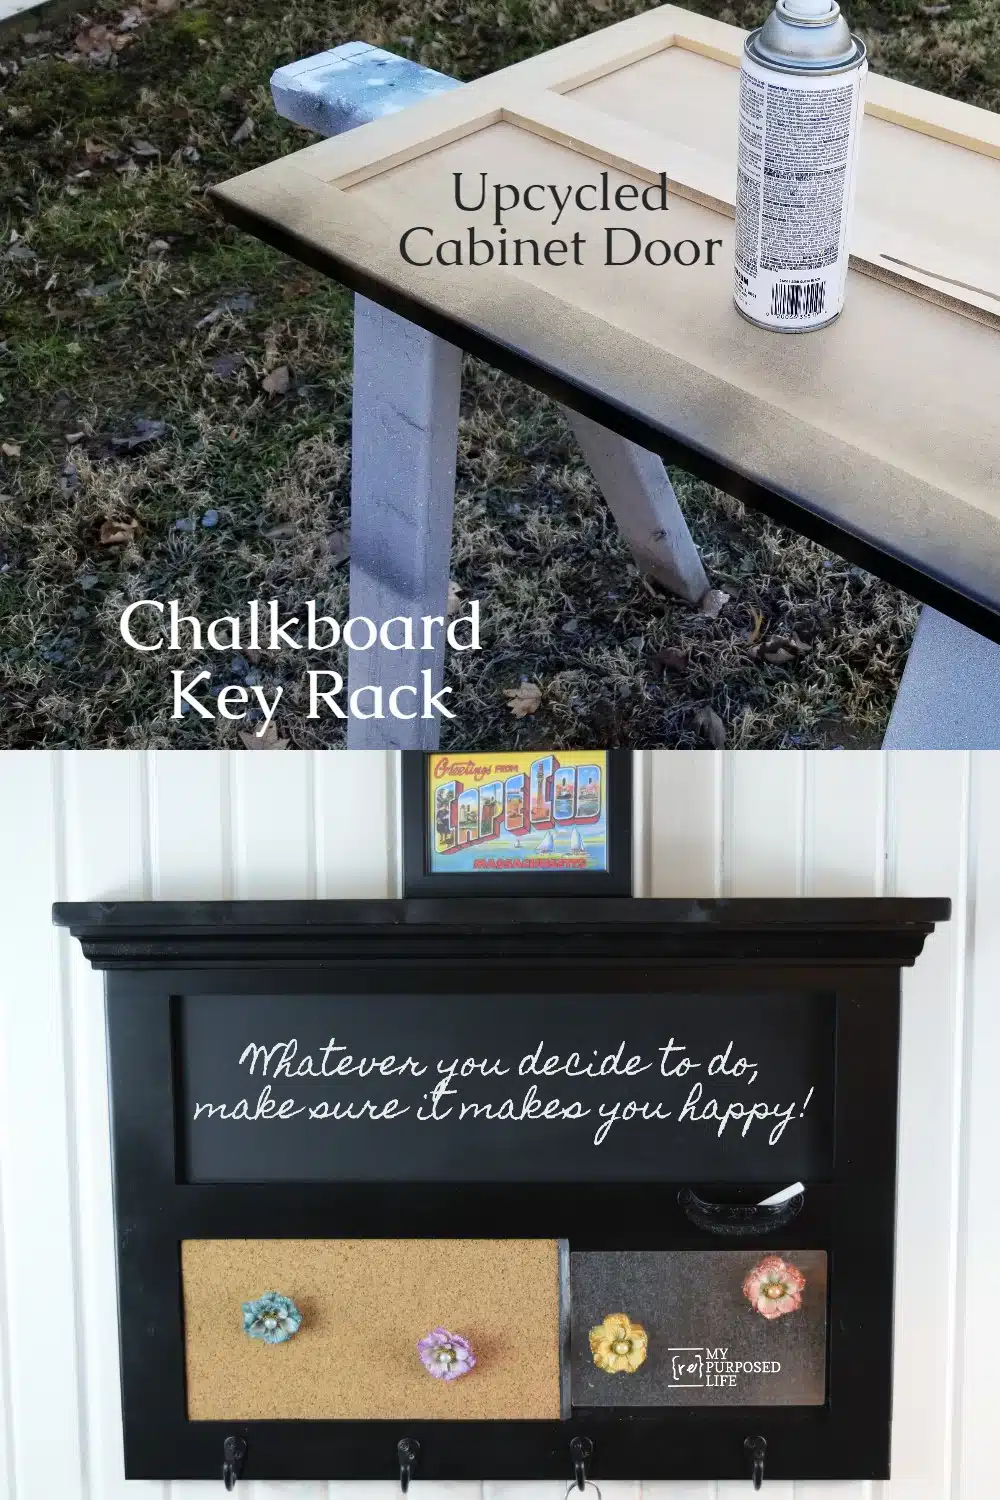 How to make a chalkboard key rack wall organizer out of a repurposed cabinet door. Complete with a cork board, chalkboard, and magnet board. Bonus key hooks. #MyRepurposedLife #repurposed #cabinet #door #chalkboard #memo #keyrack via @repurposedlife